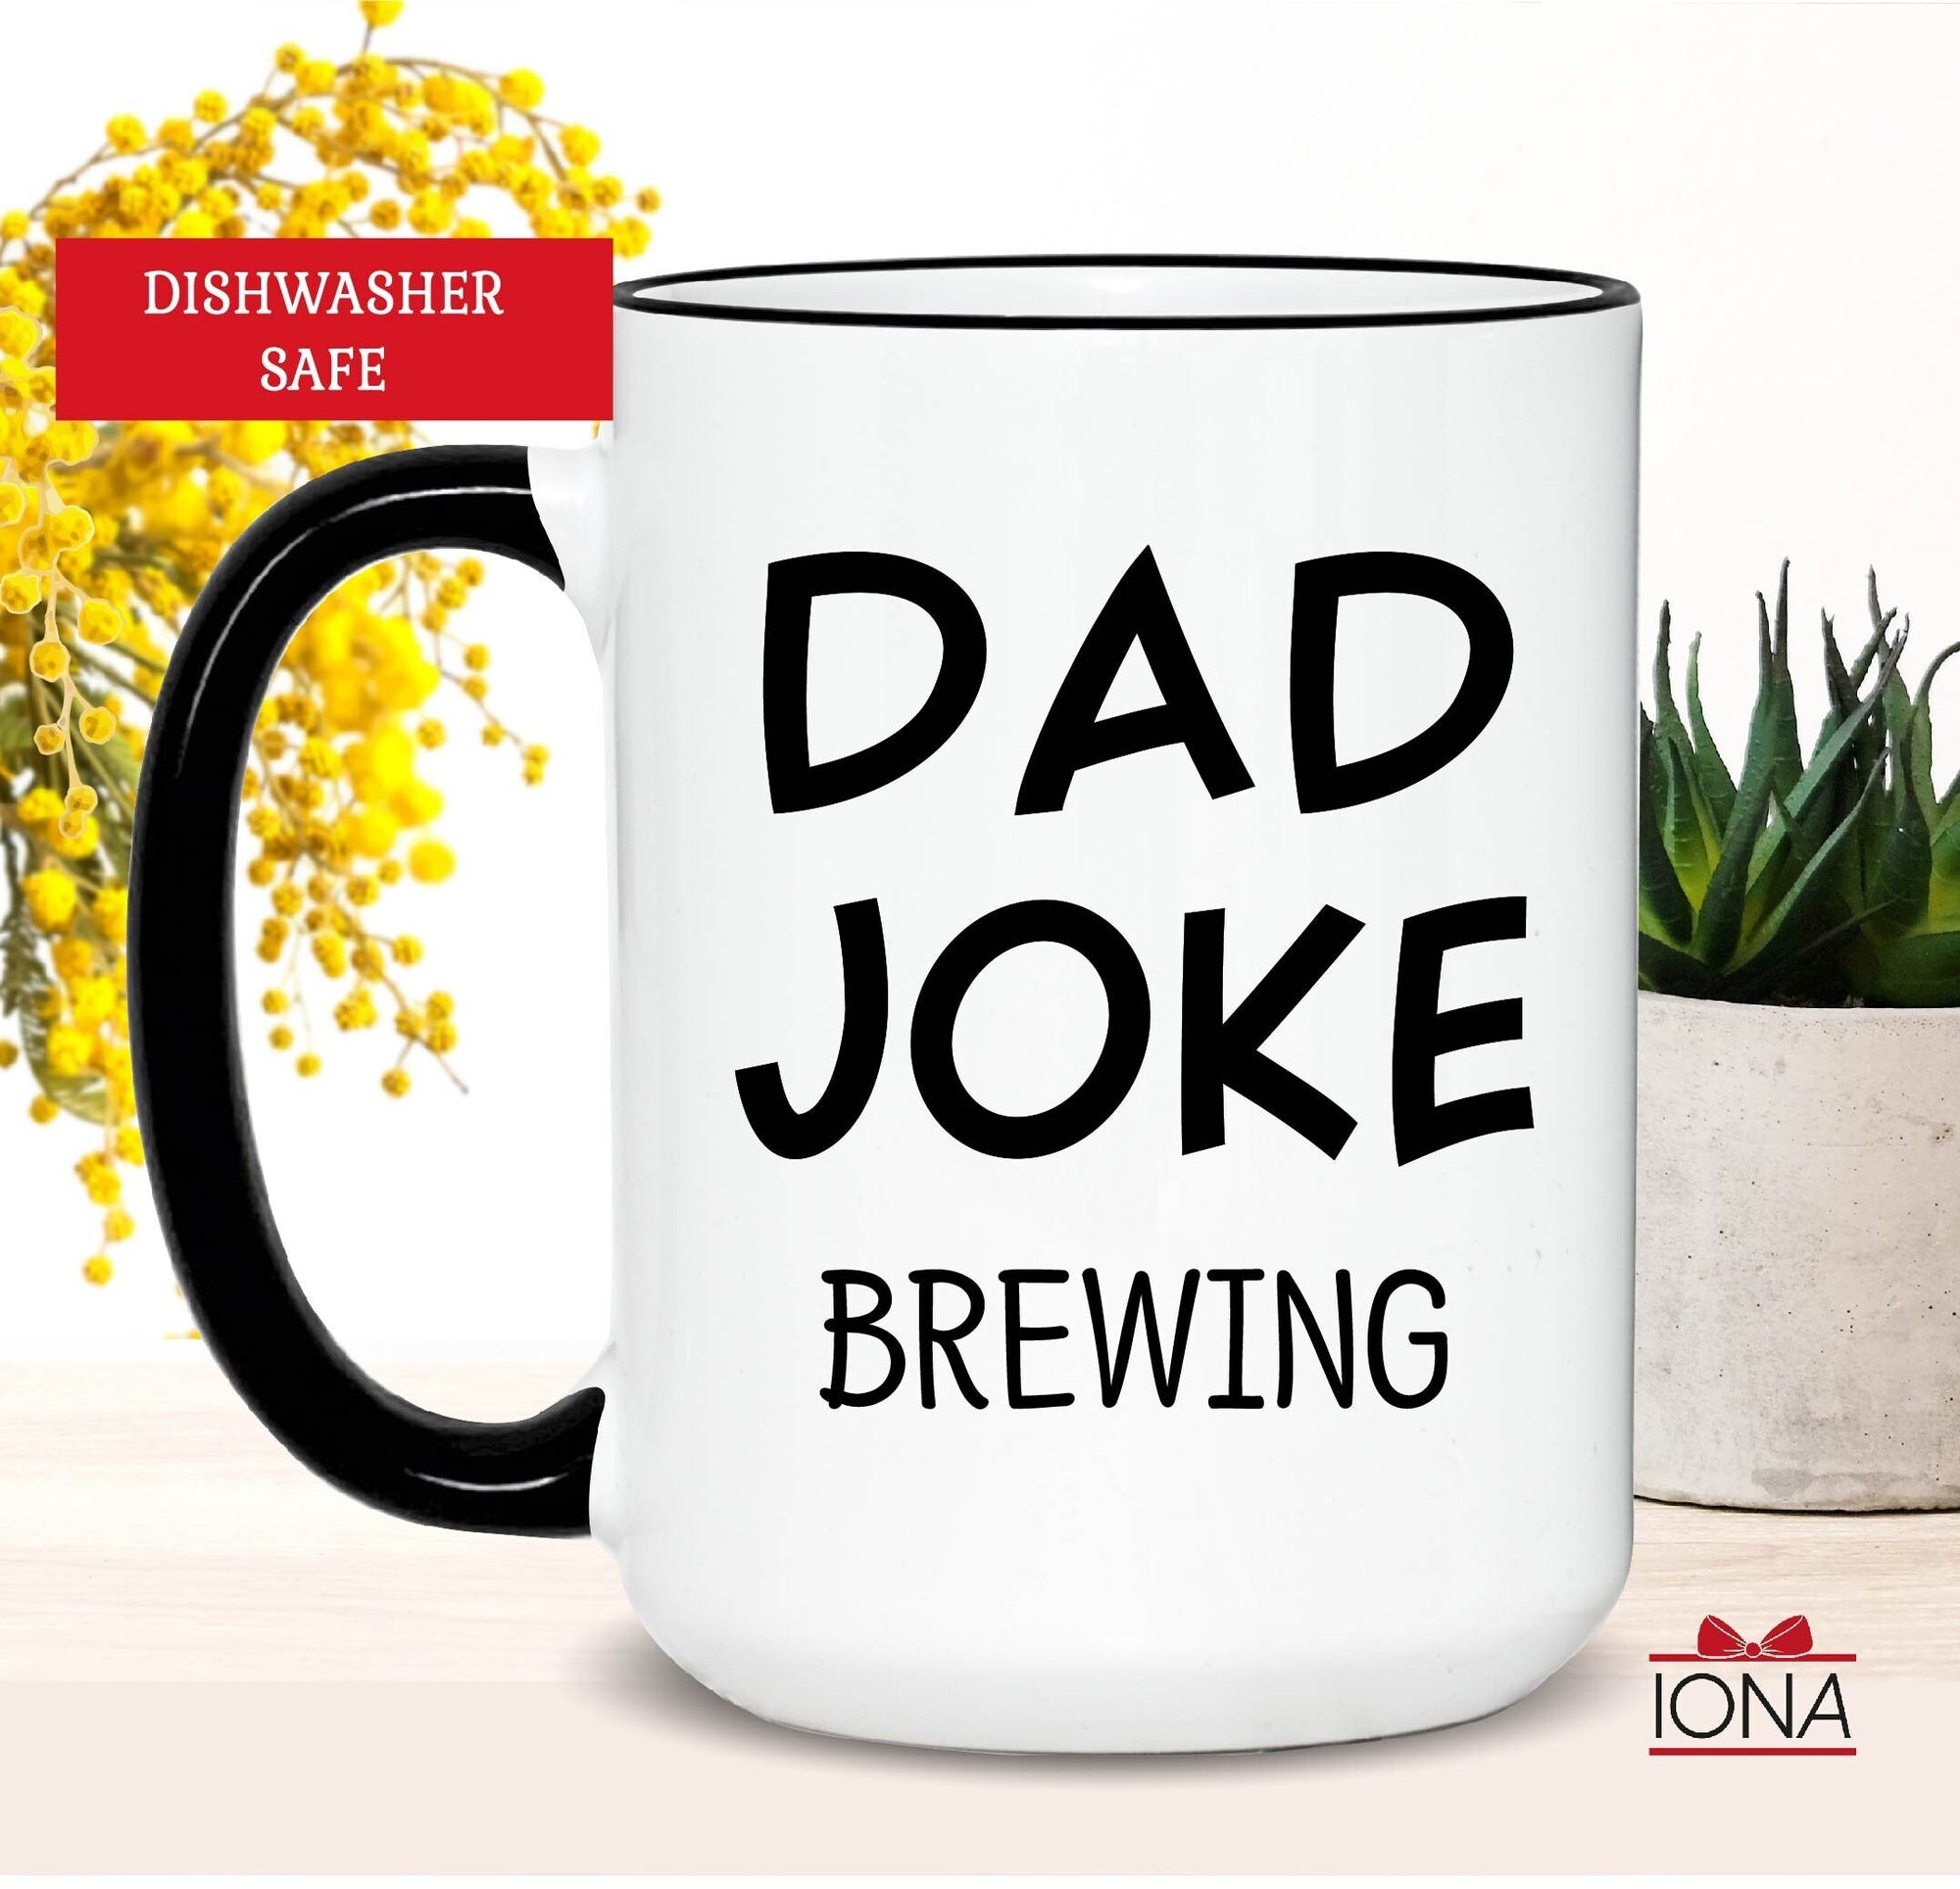 Funny Dad Joke Coffee Mug, Geek Father's Day Gift, Dad Birthday Gift from Daughter, Son, Dad Joke Brewing Tea Cup for Father, Novelty